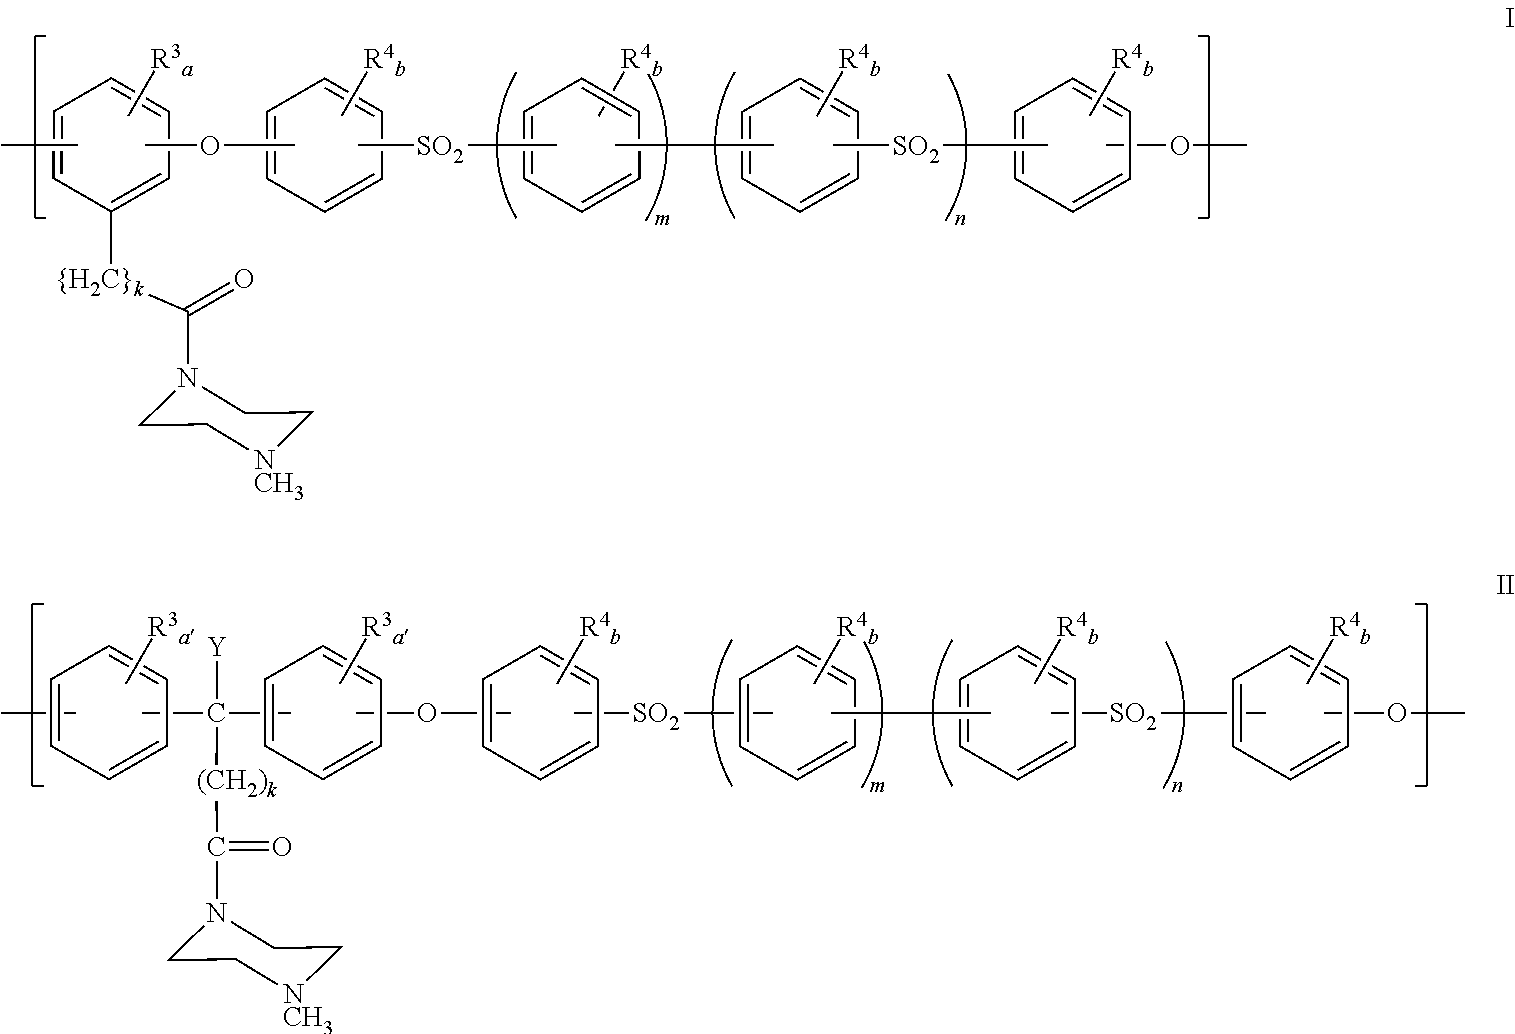 Polyarylether compositions bearing zwitterion functionalities